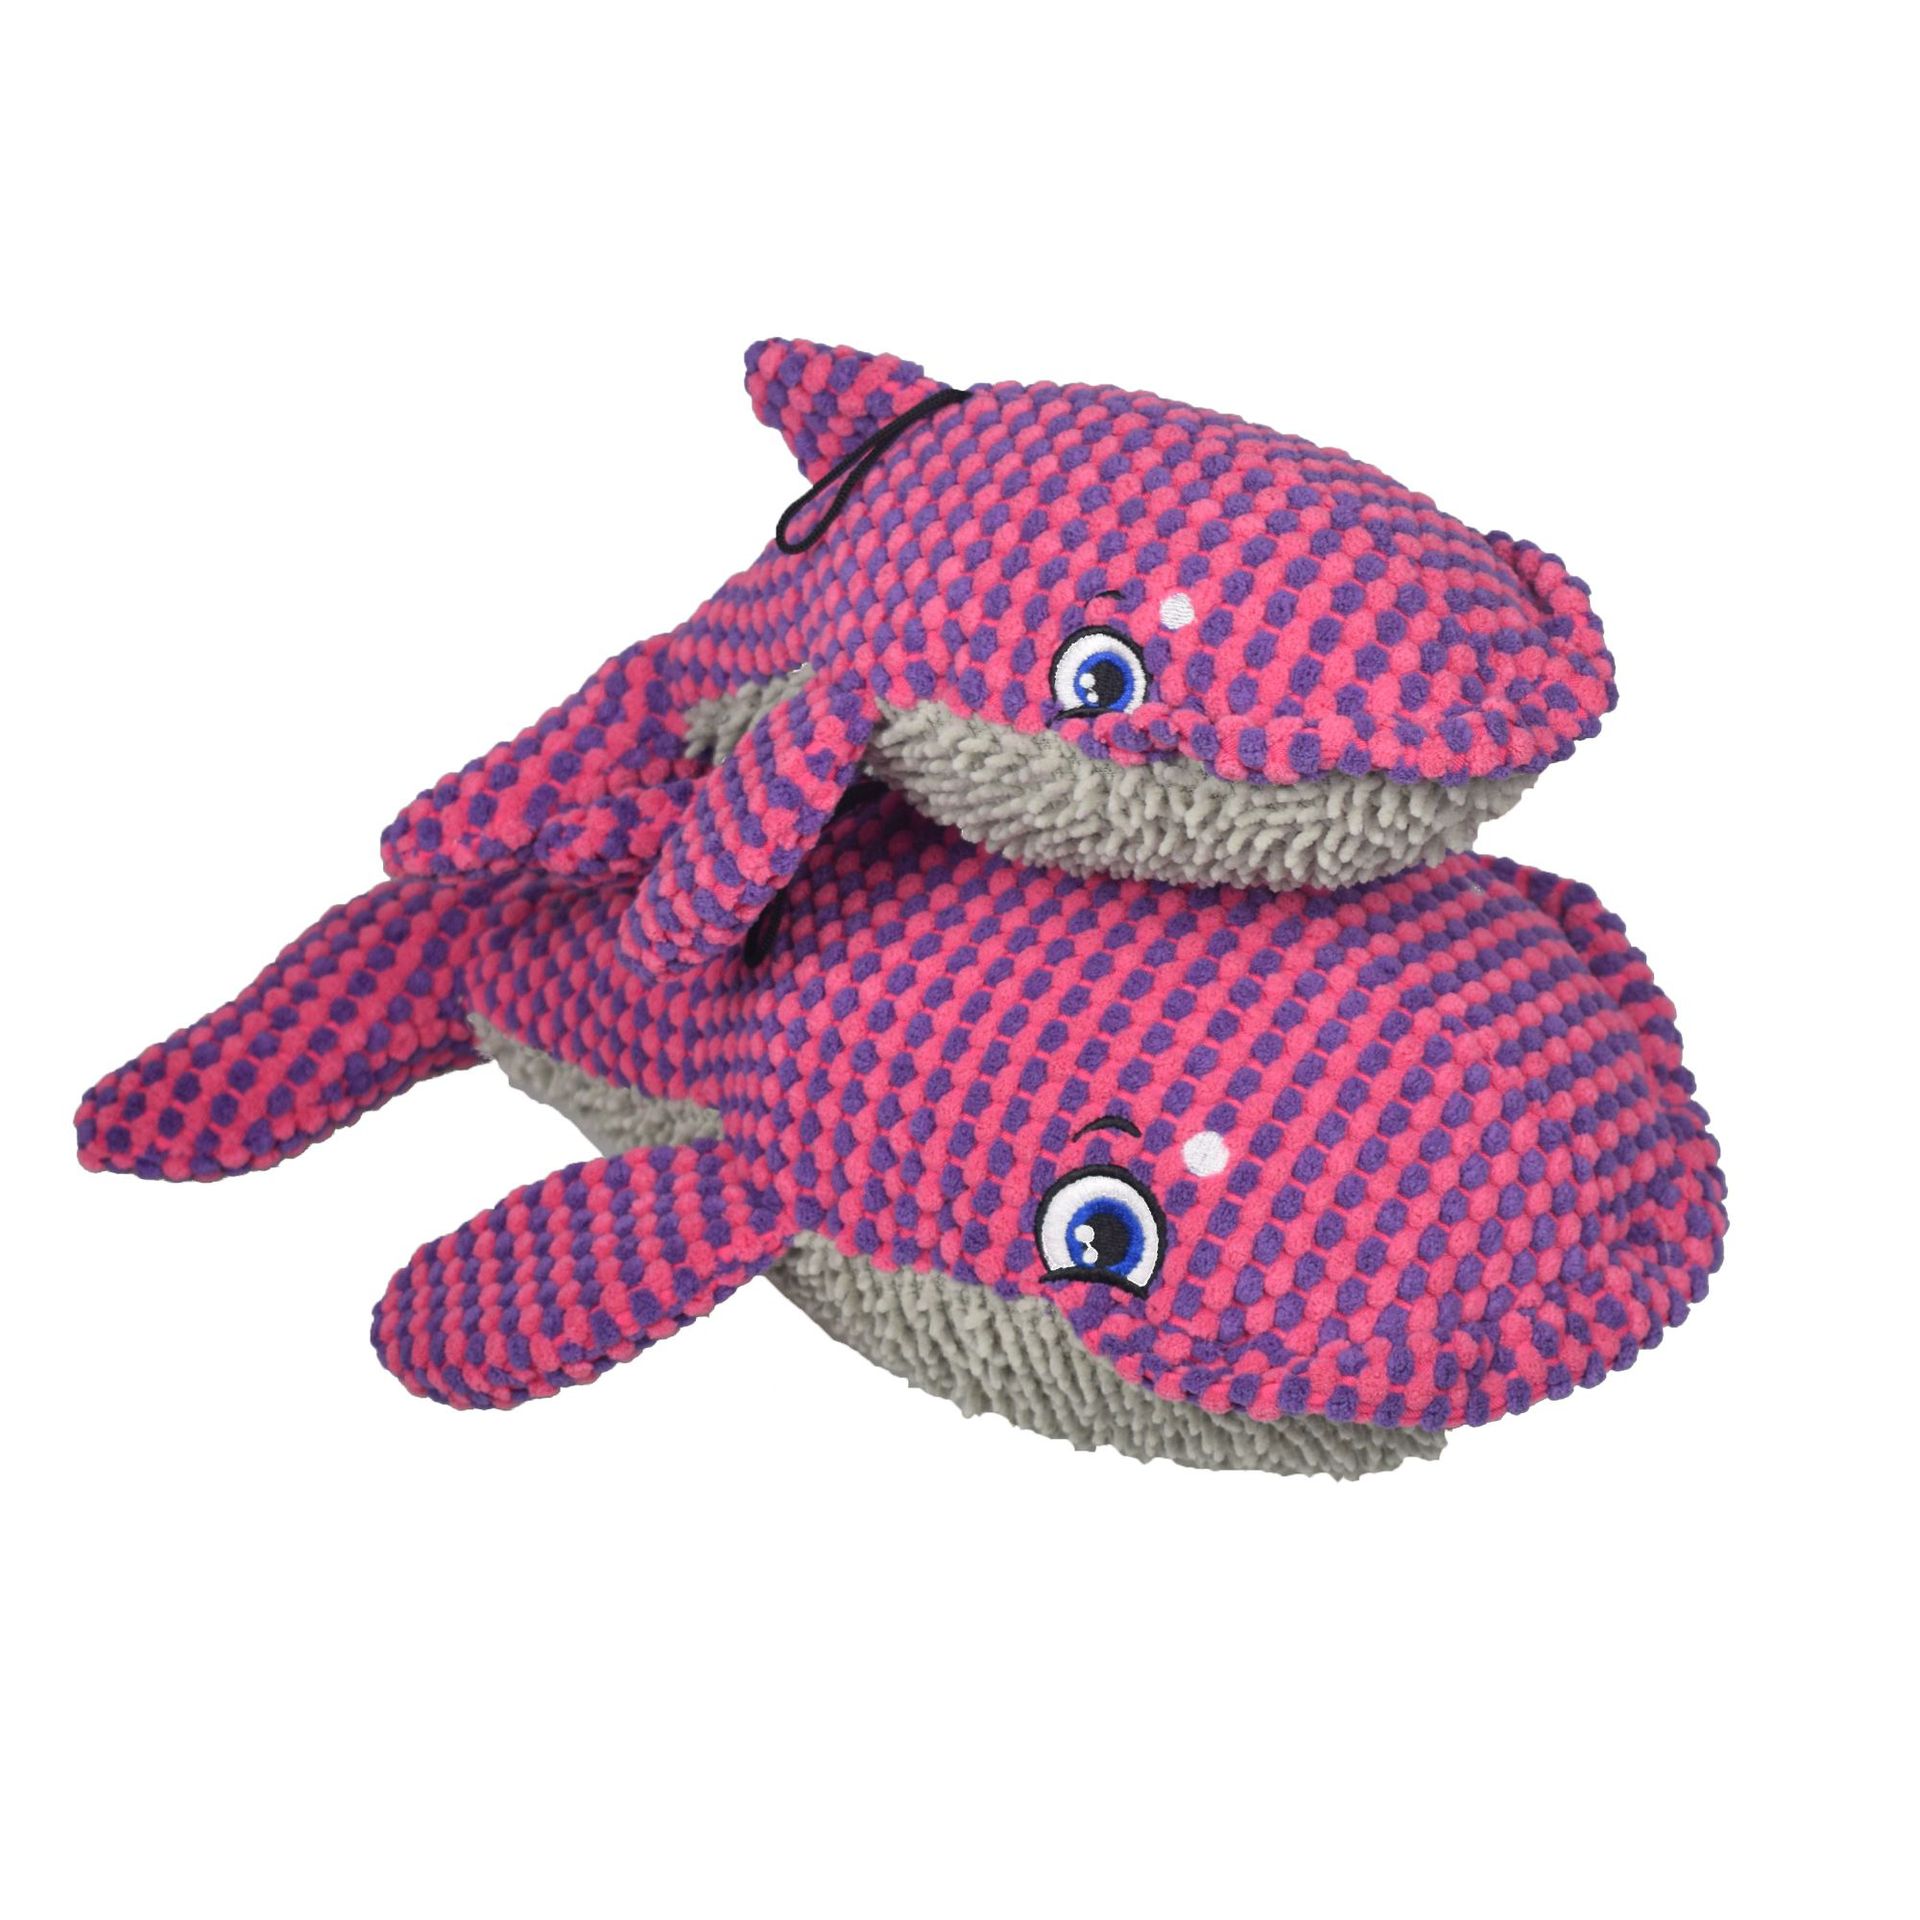 Two-color pineapple corduroy whale biting chewing,teeth cleaning,durable interactive plush toy, Tug of War Plush Dog Toy